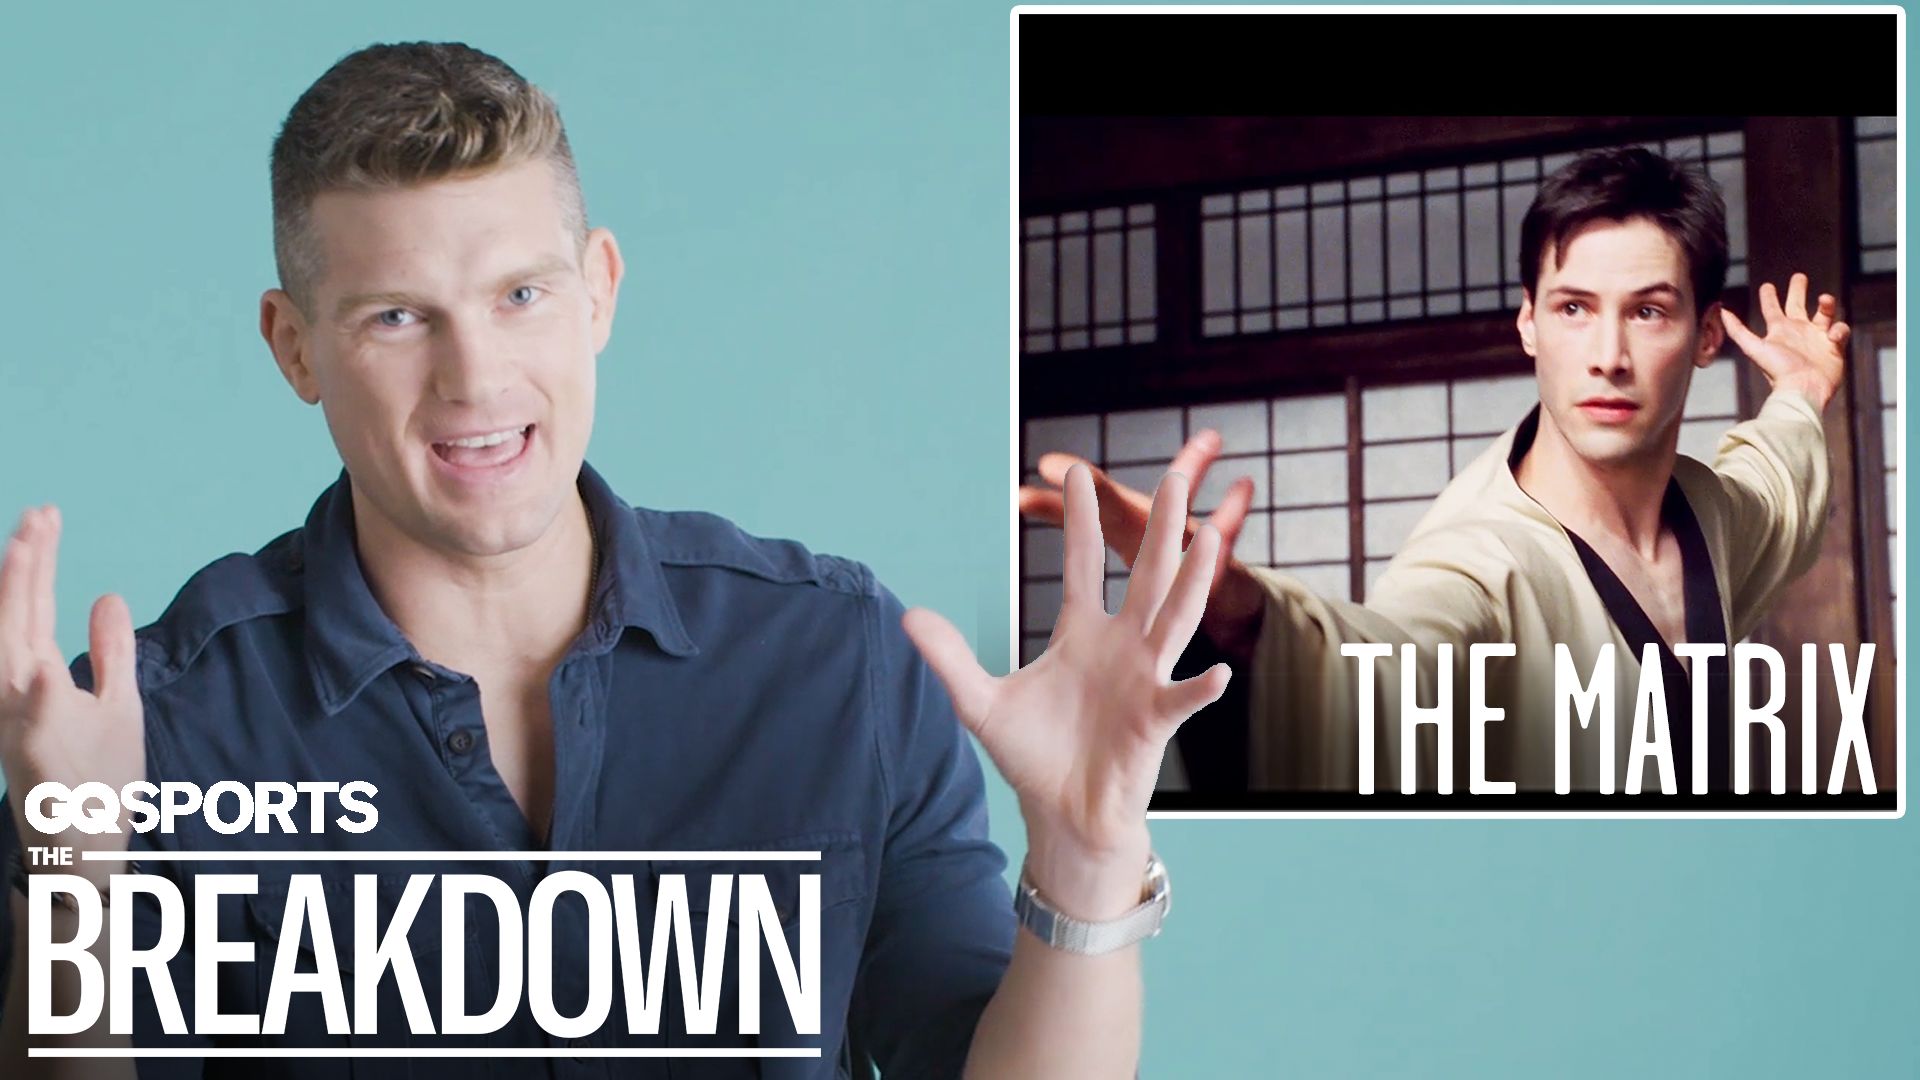 Watch The Breakdown Ufc Fighter Stephen Thompson Breaks Down Martial Arts Scenes From Movies Gq Video Cne Gq Com Gq